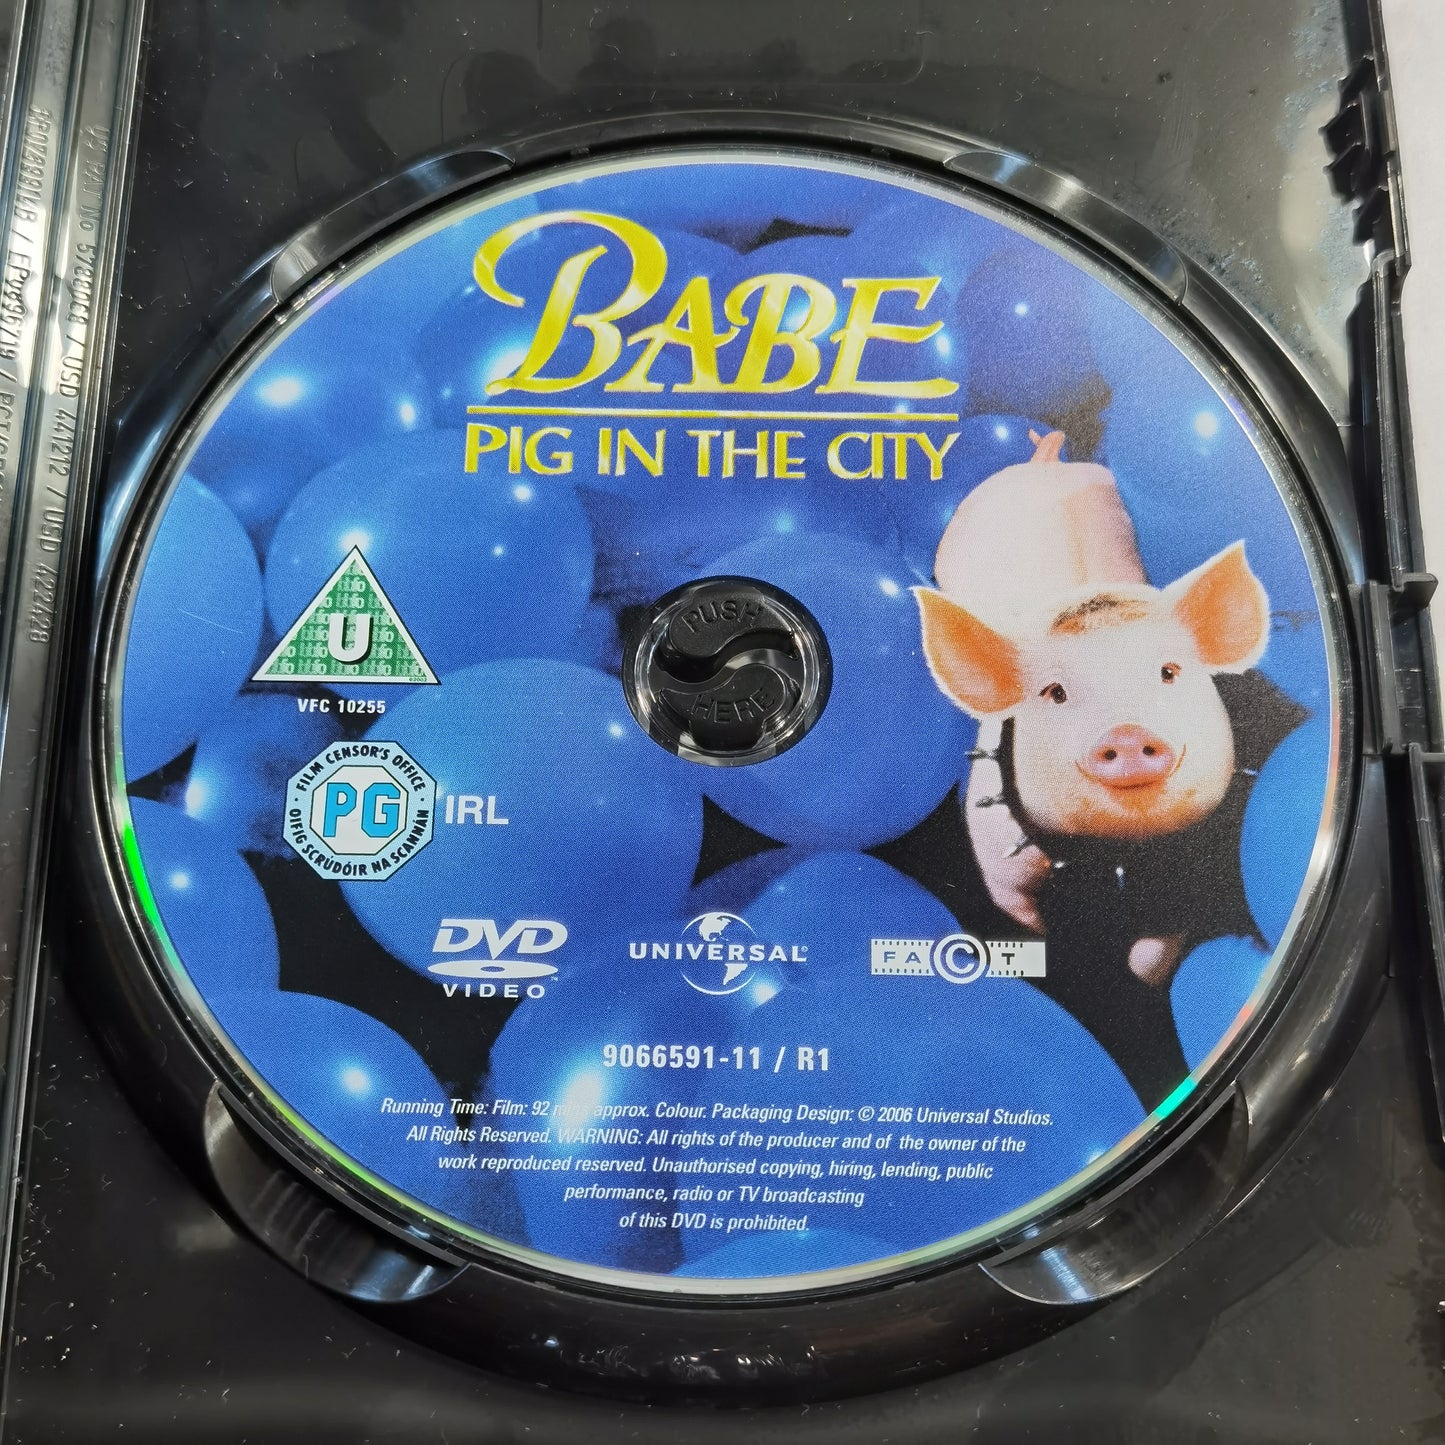 Babe: Pig in the City (1998) - DVD UK 2002